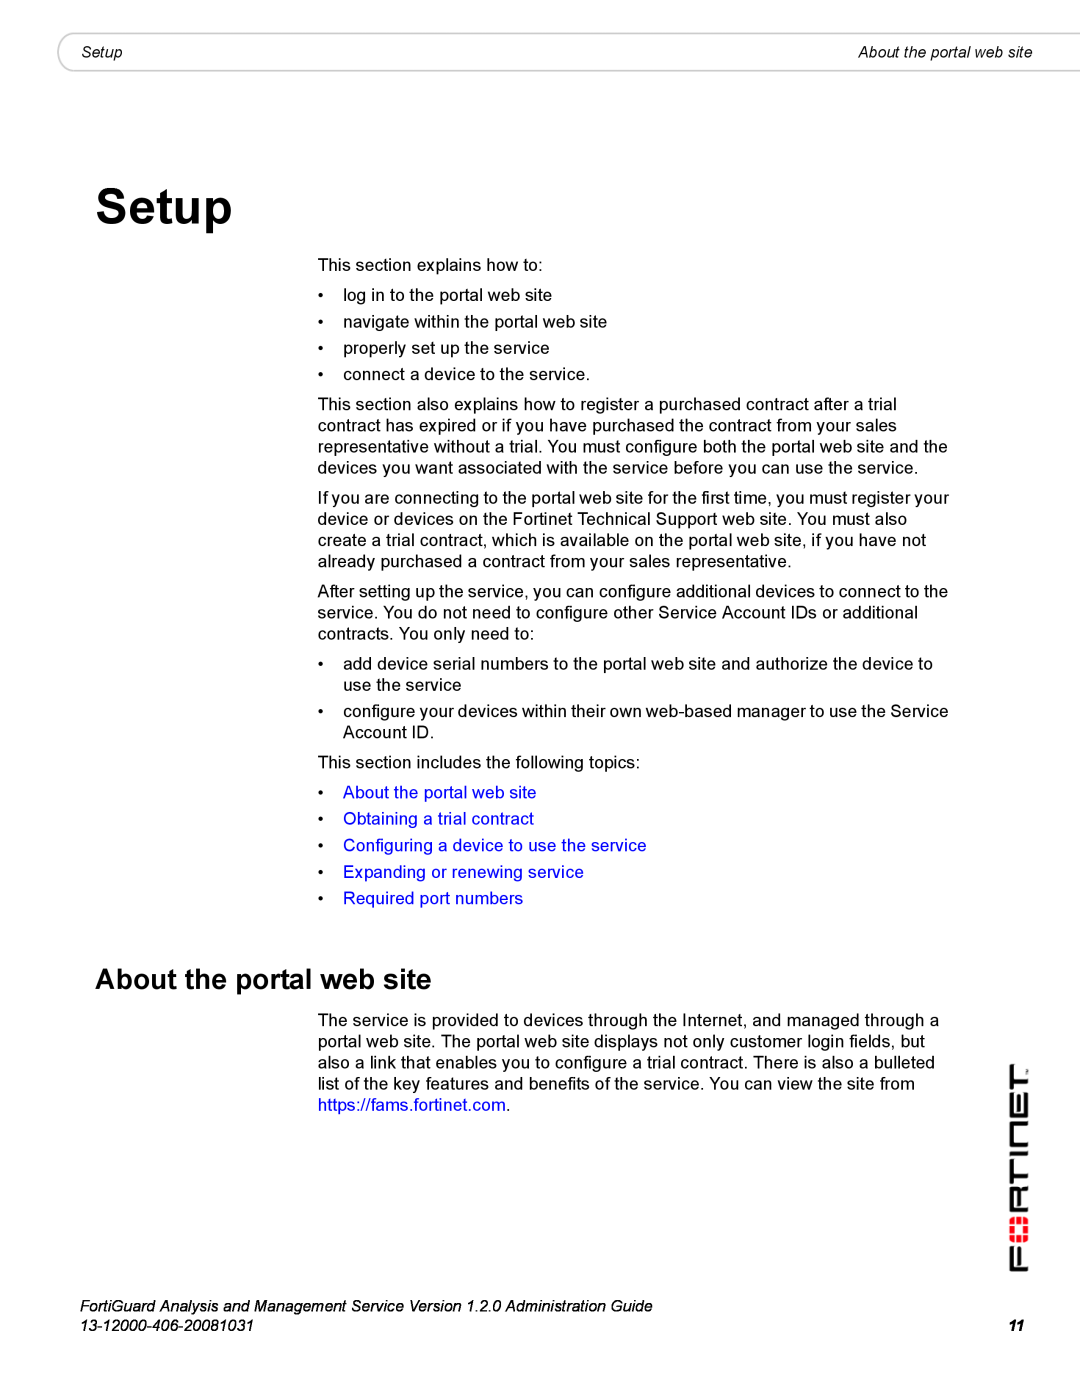 Fortinet 1.2.0 manual Setup, About the portal web site Obtaining a trial contract, Required port numbers 